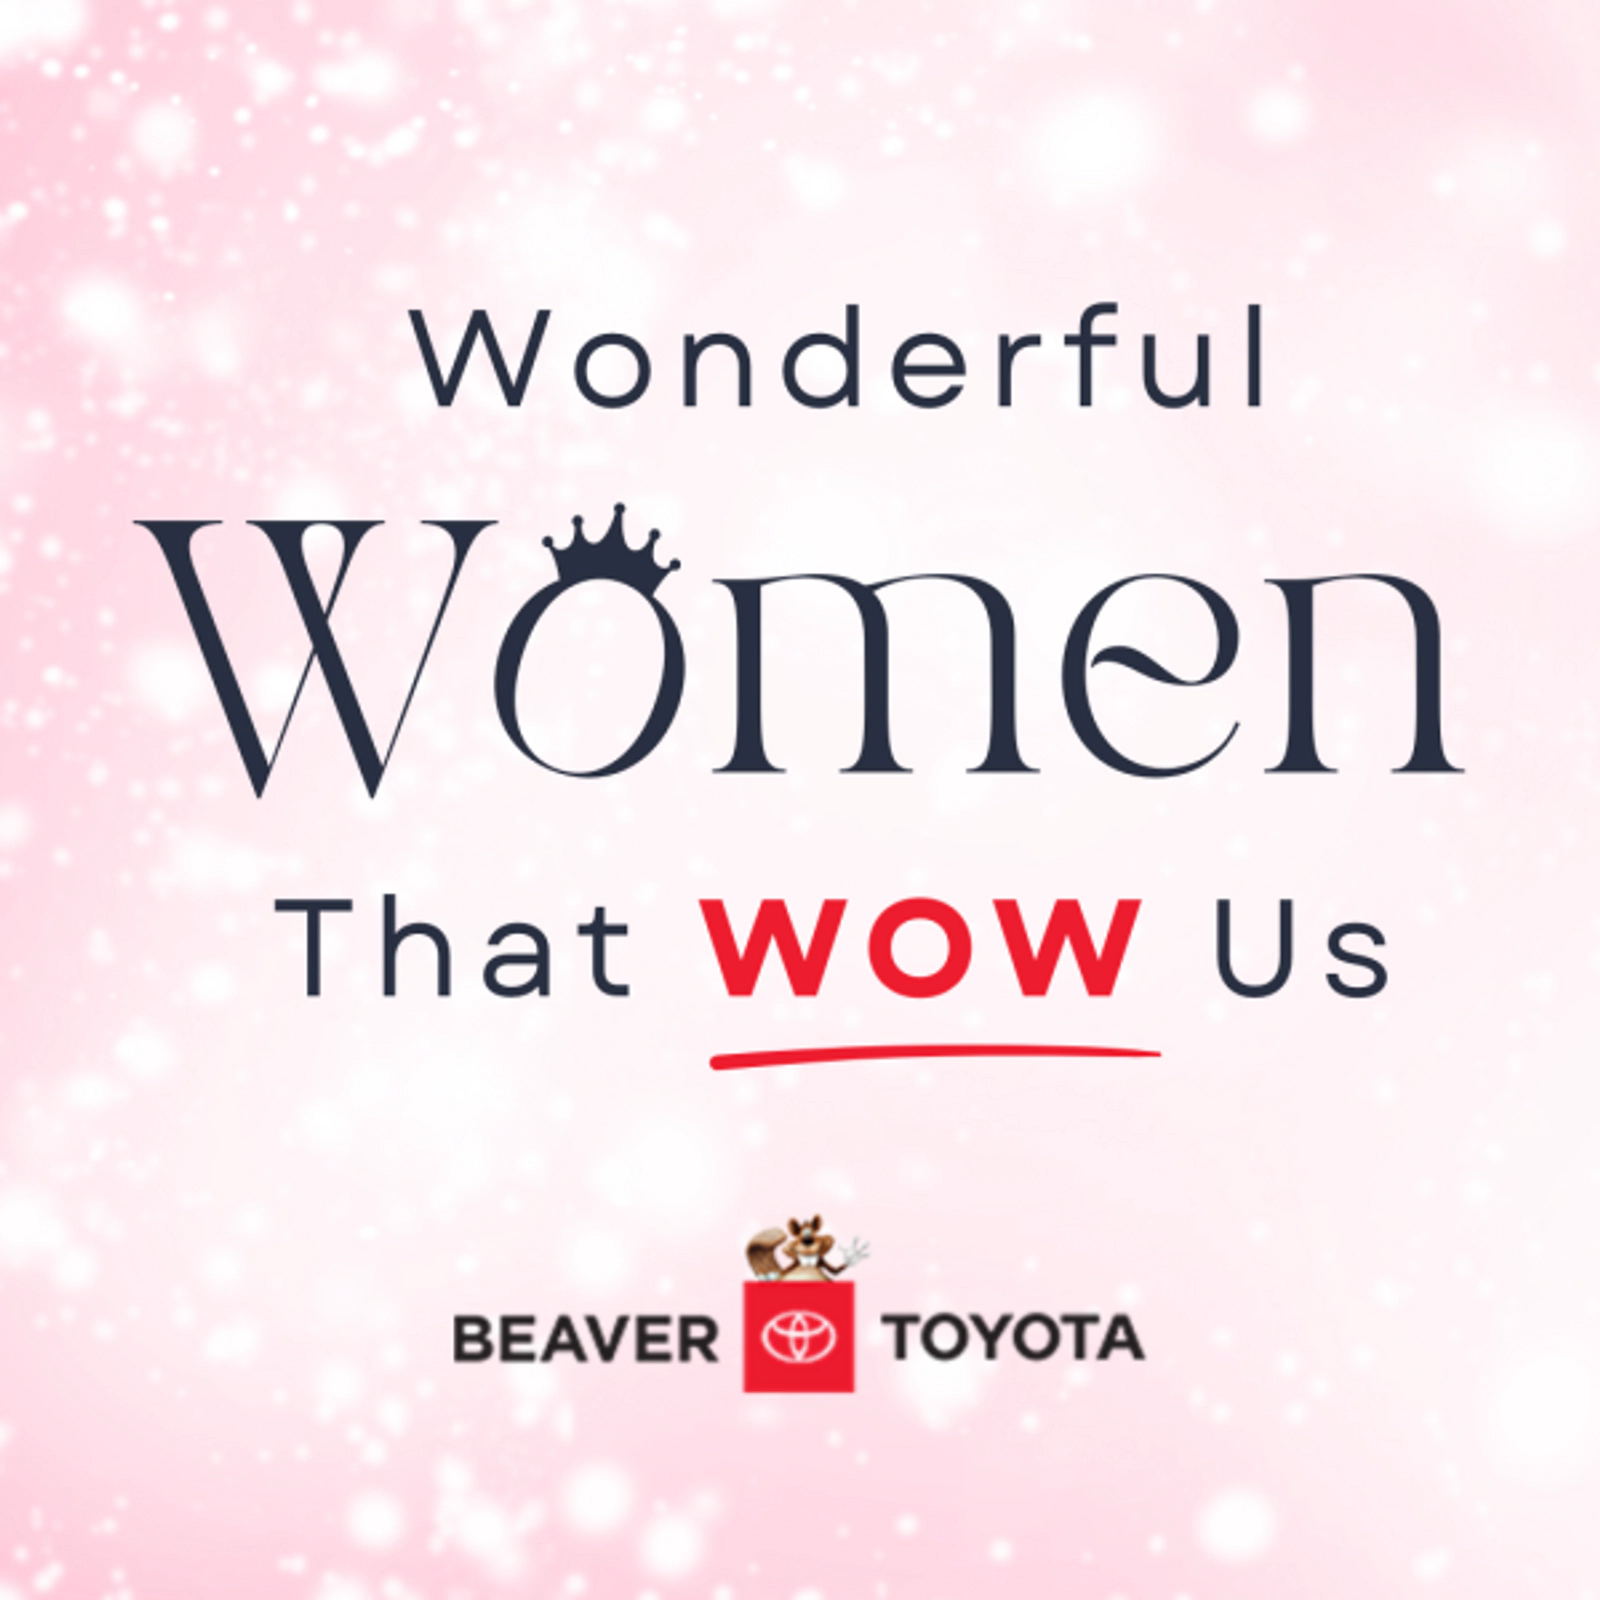 Wonderful Women The WOW Us from Beaver Toyota